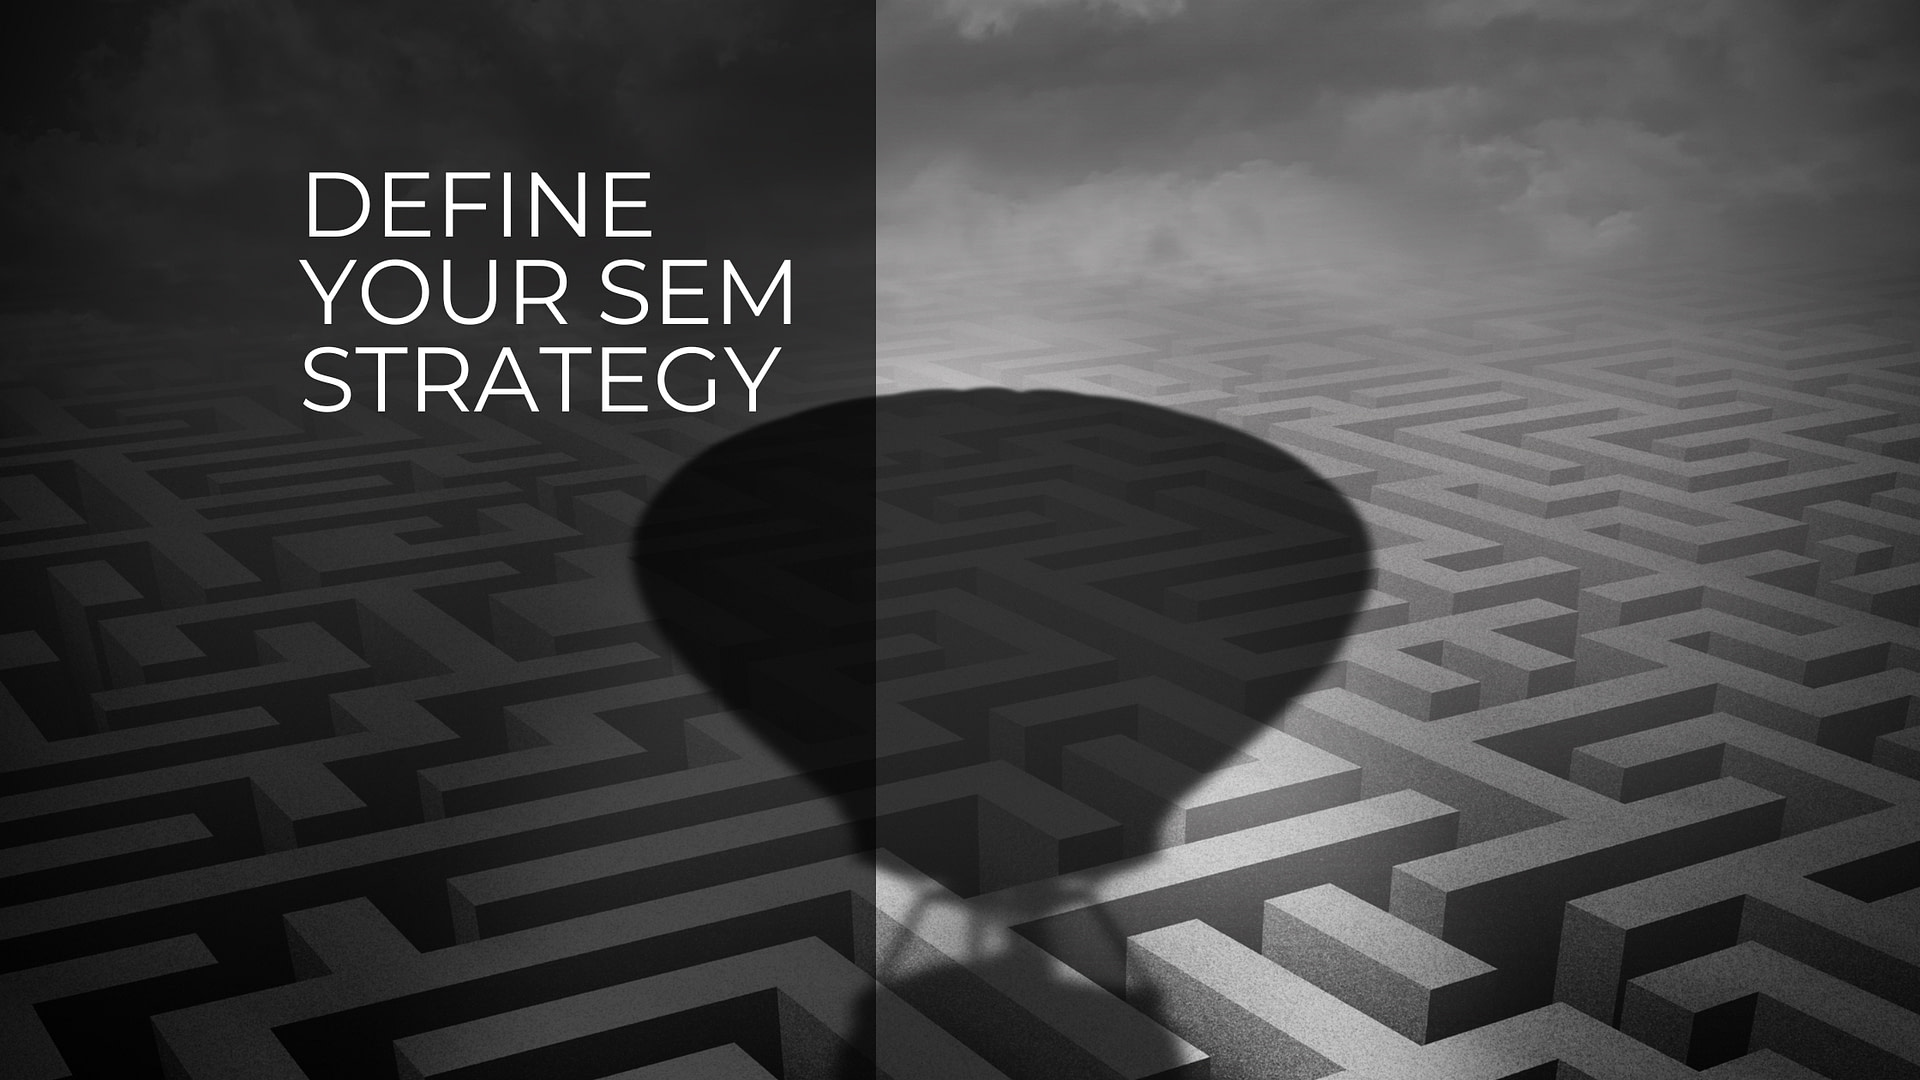 DEFINE your search engine marketing strategy with a view from a hot air ballom looking across a maze